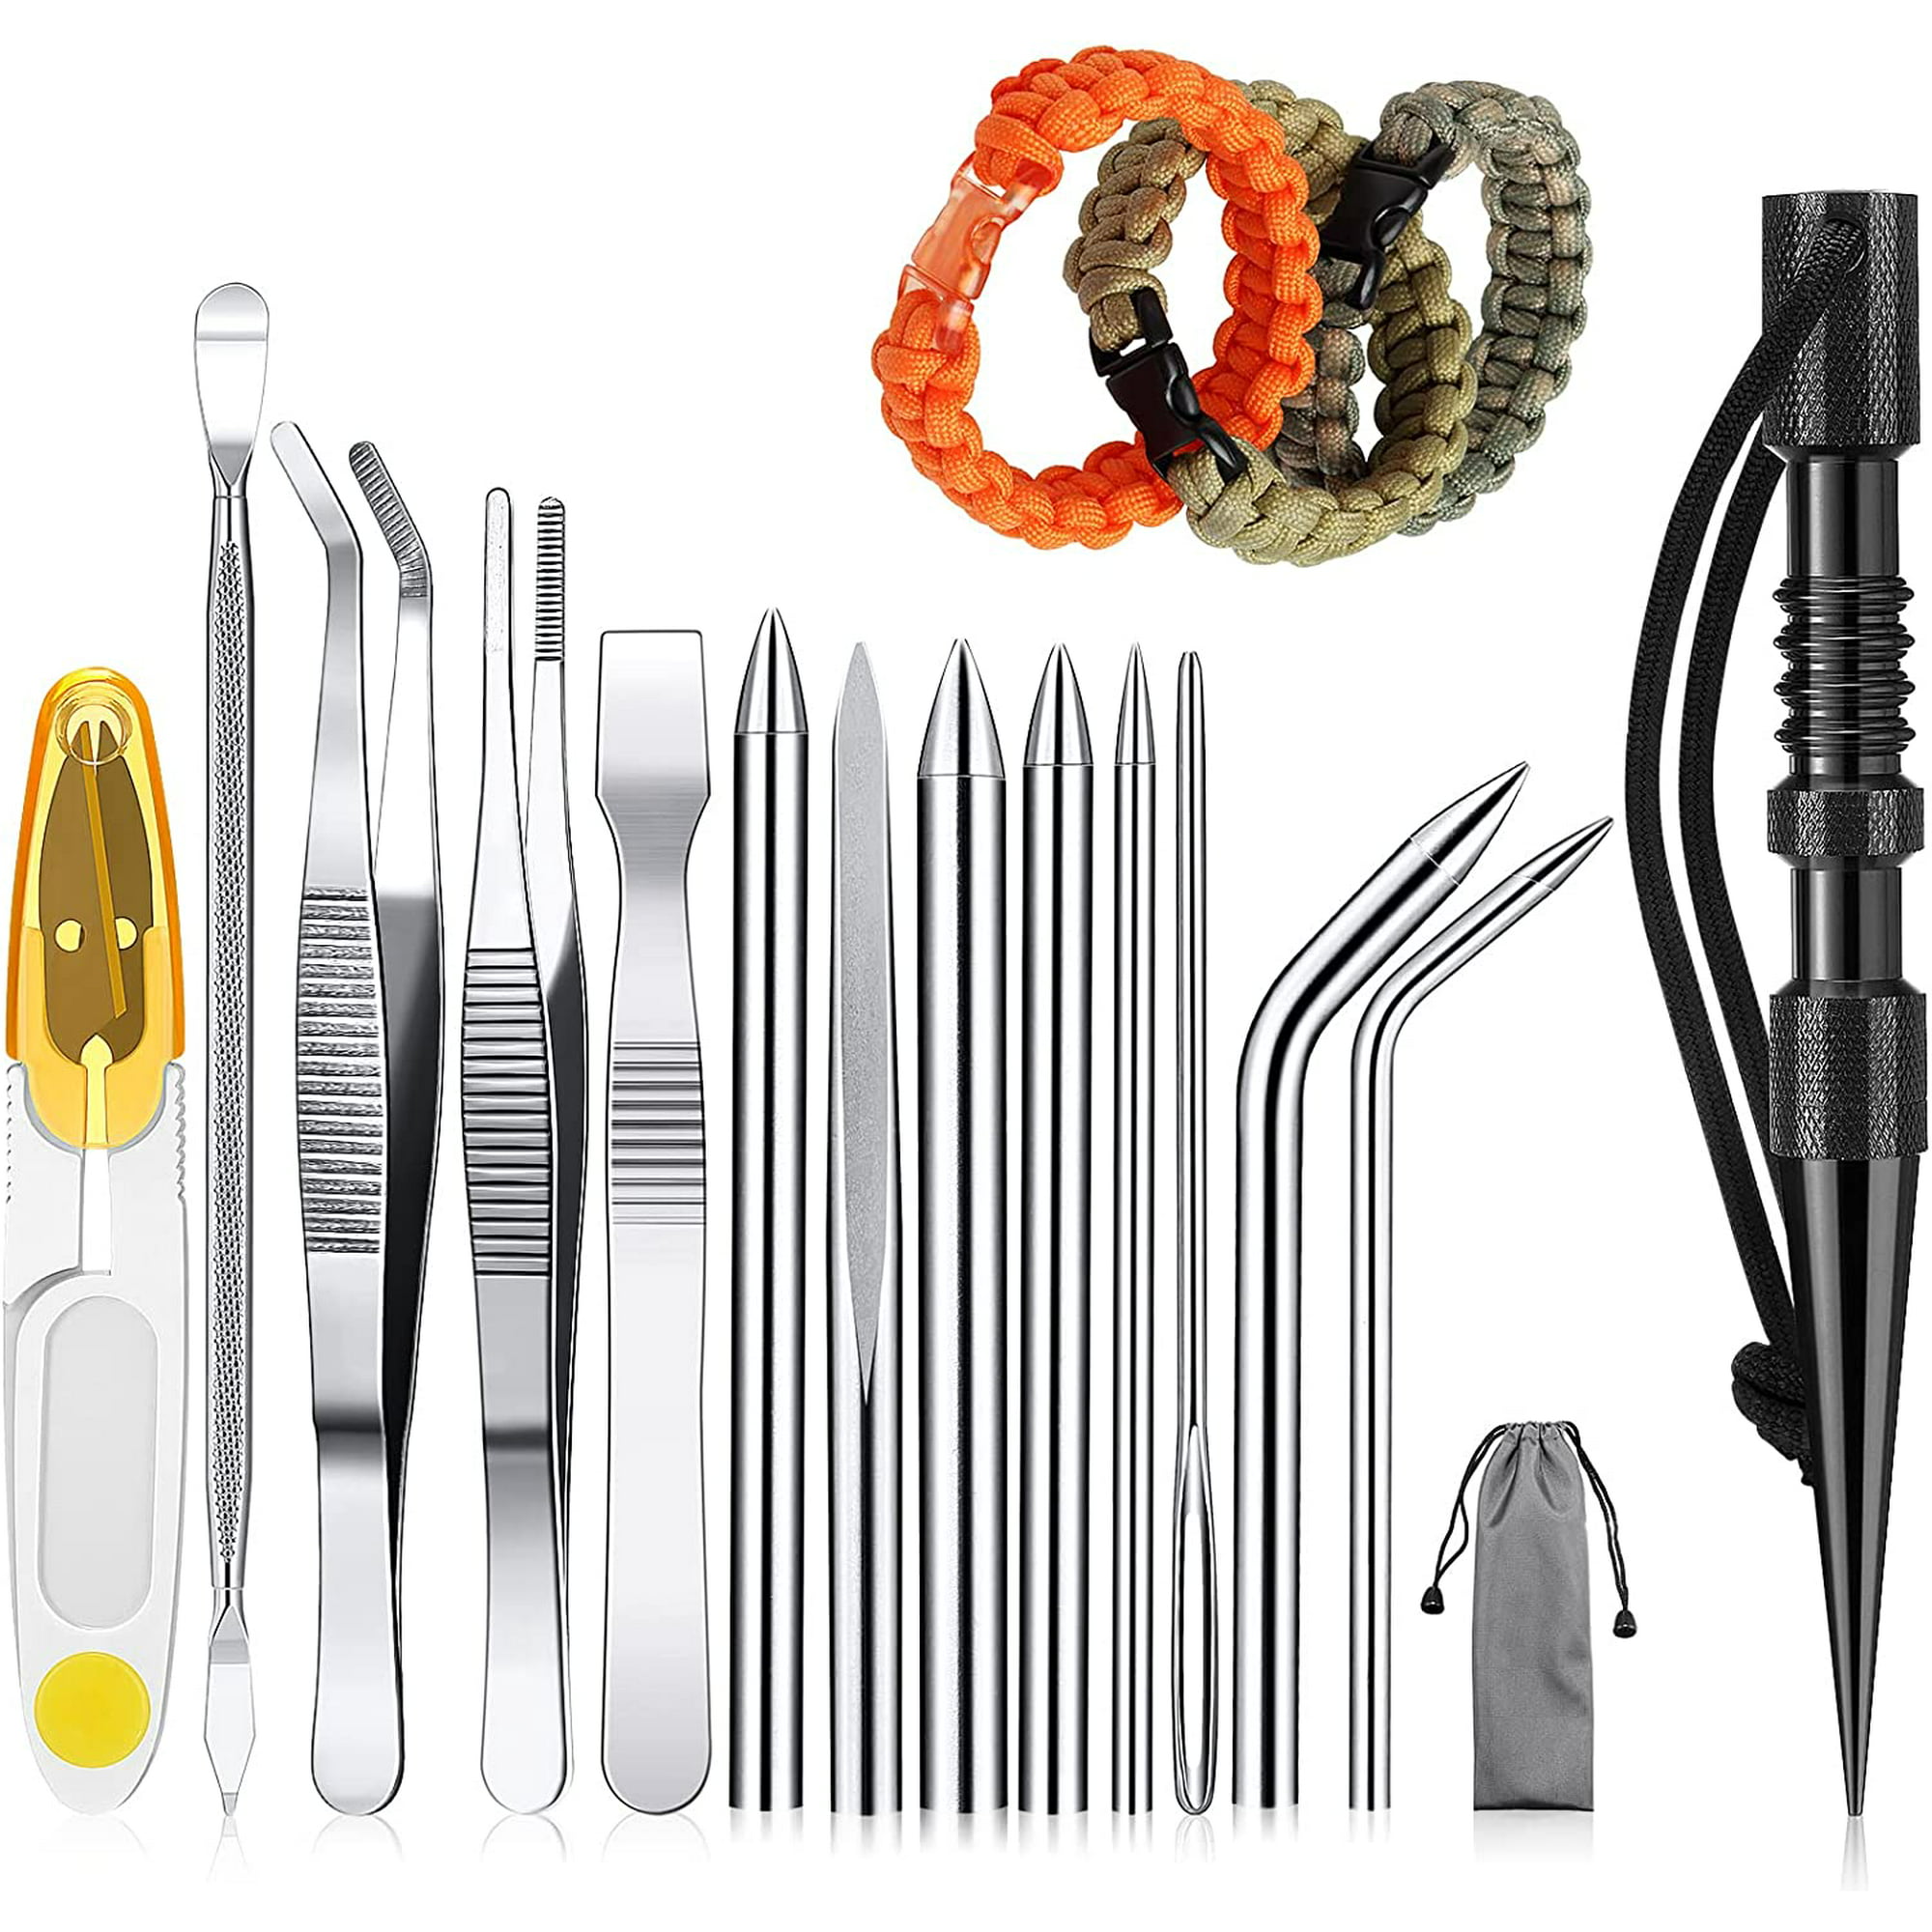 Knotter Tools, Fid Paracord Fid Set Stainless Steel Paracord Lacin